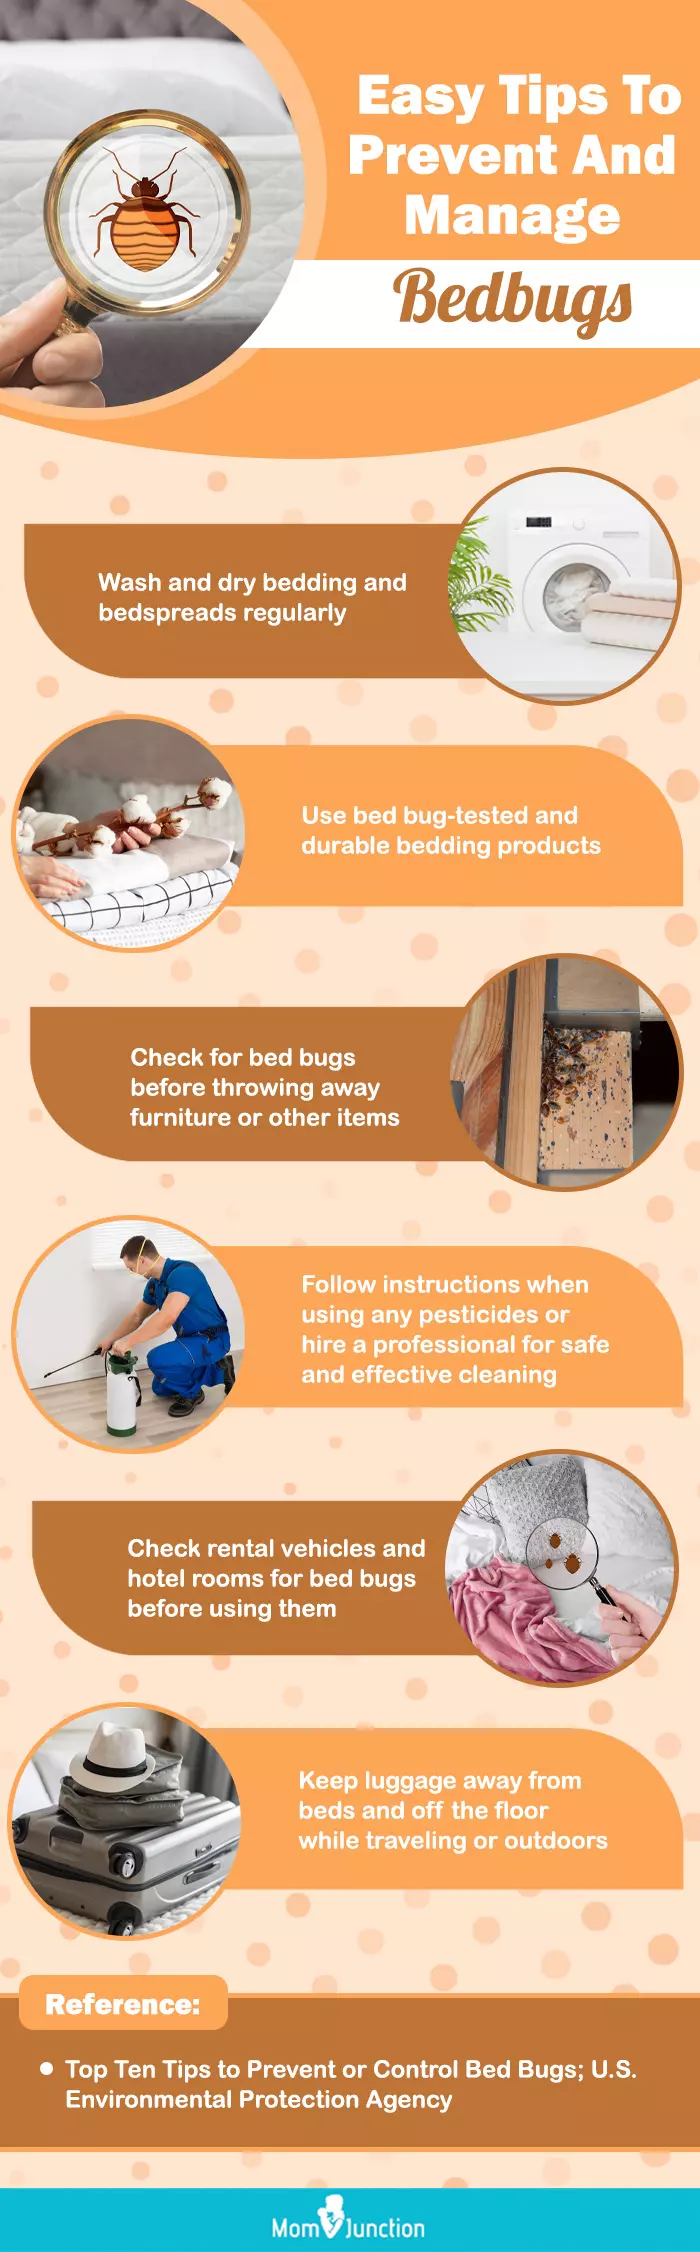 easy tips to prevent and manage bedbugs (infographic)